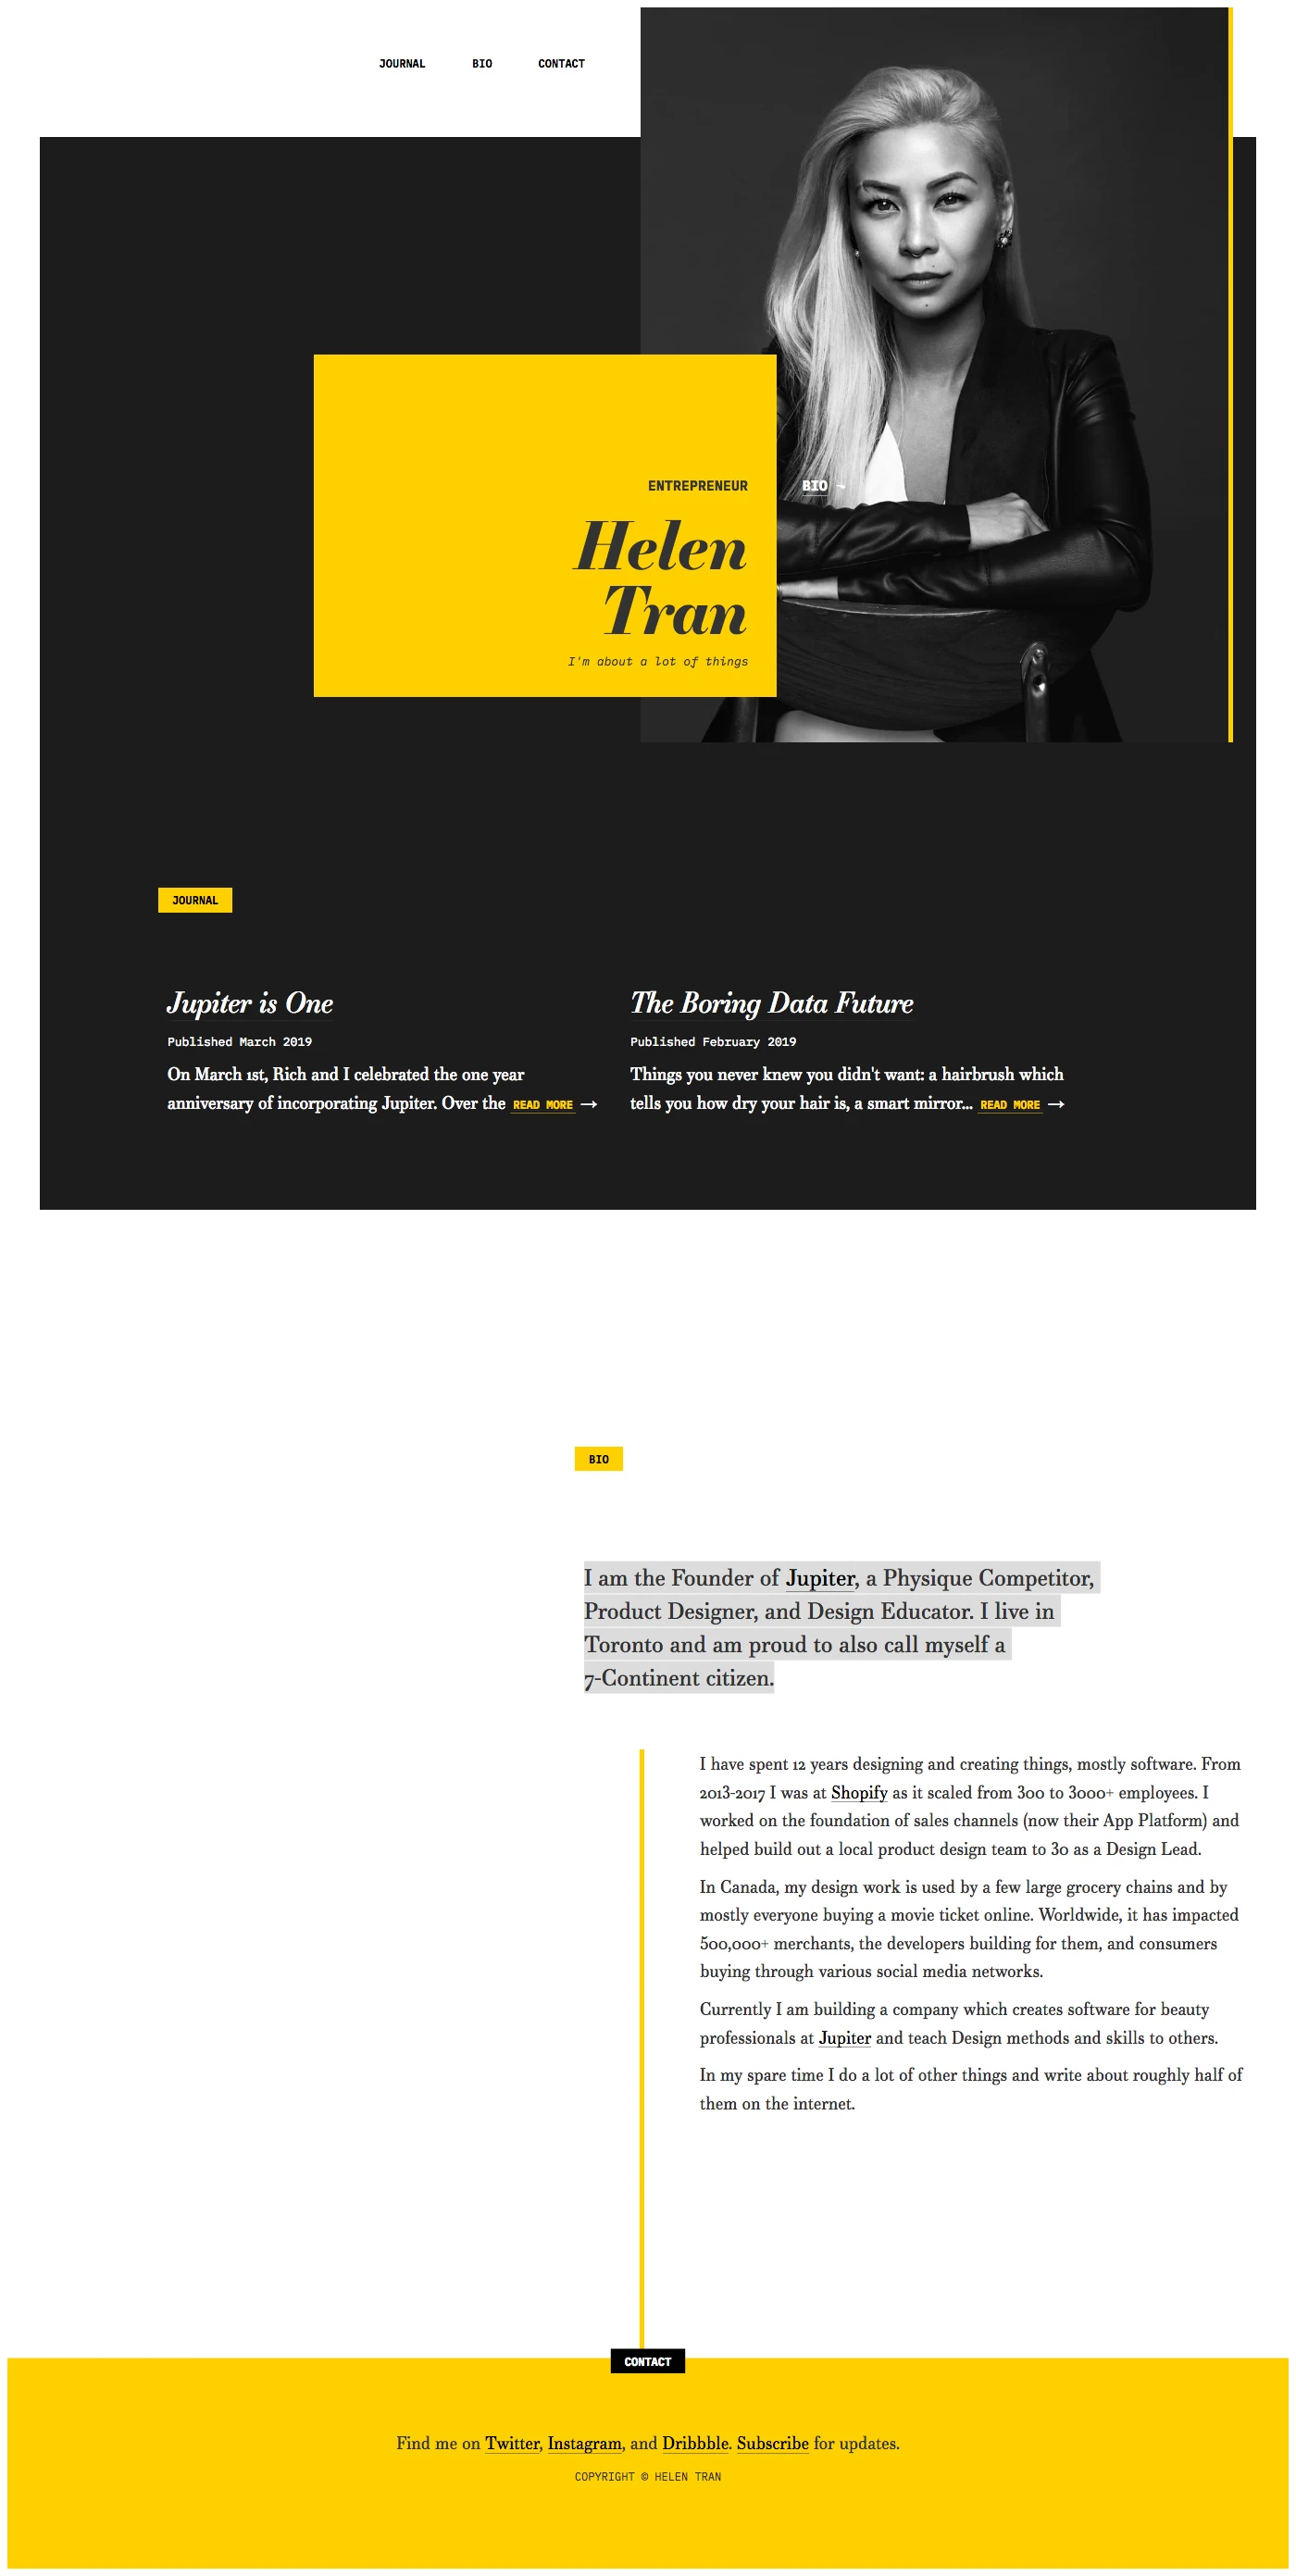 Helen Tran Landing Page Example: I am the Founder of Jupiter, a Physique Competitor, Product Designer, and Design Educator. I live in Toronto and am proud to also call myself a 7-Continent citizen.